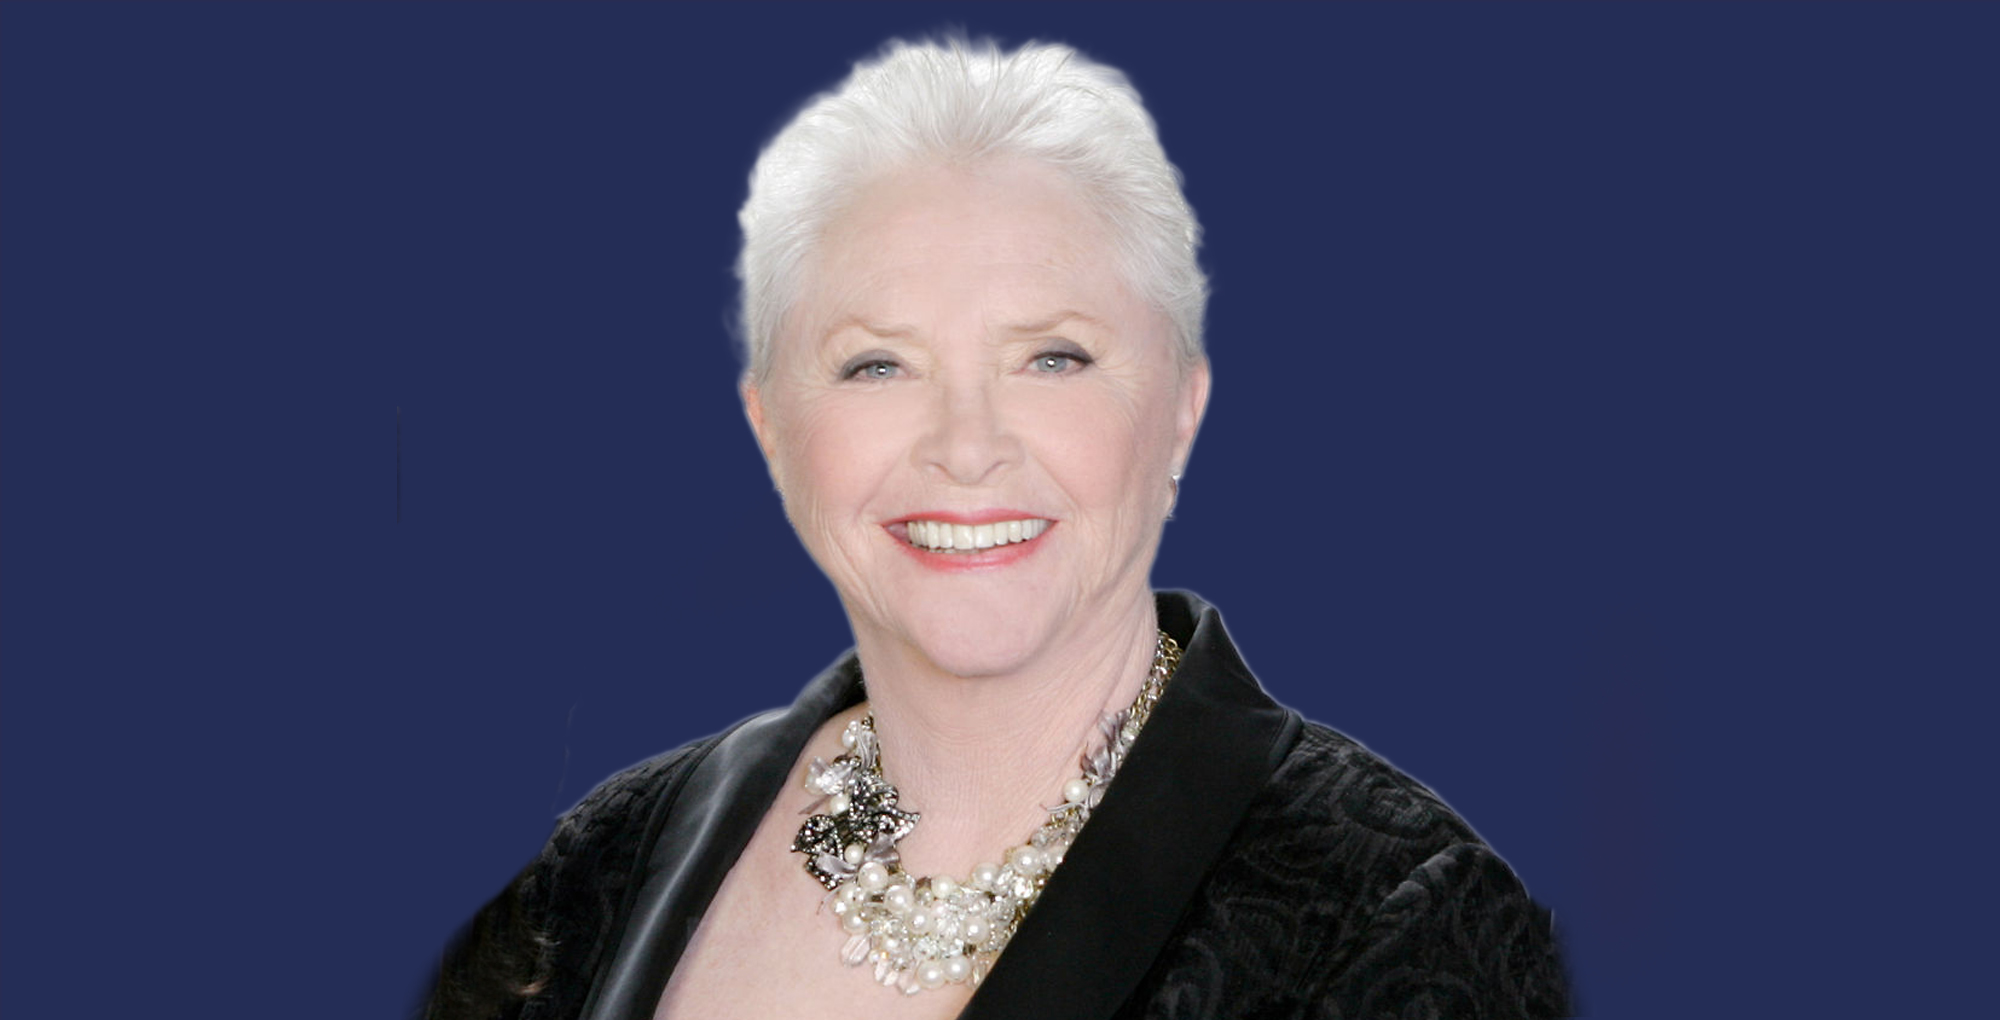 susan flannery played stephanie forrester on the bold and the beautiful.